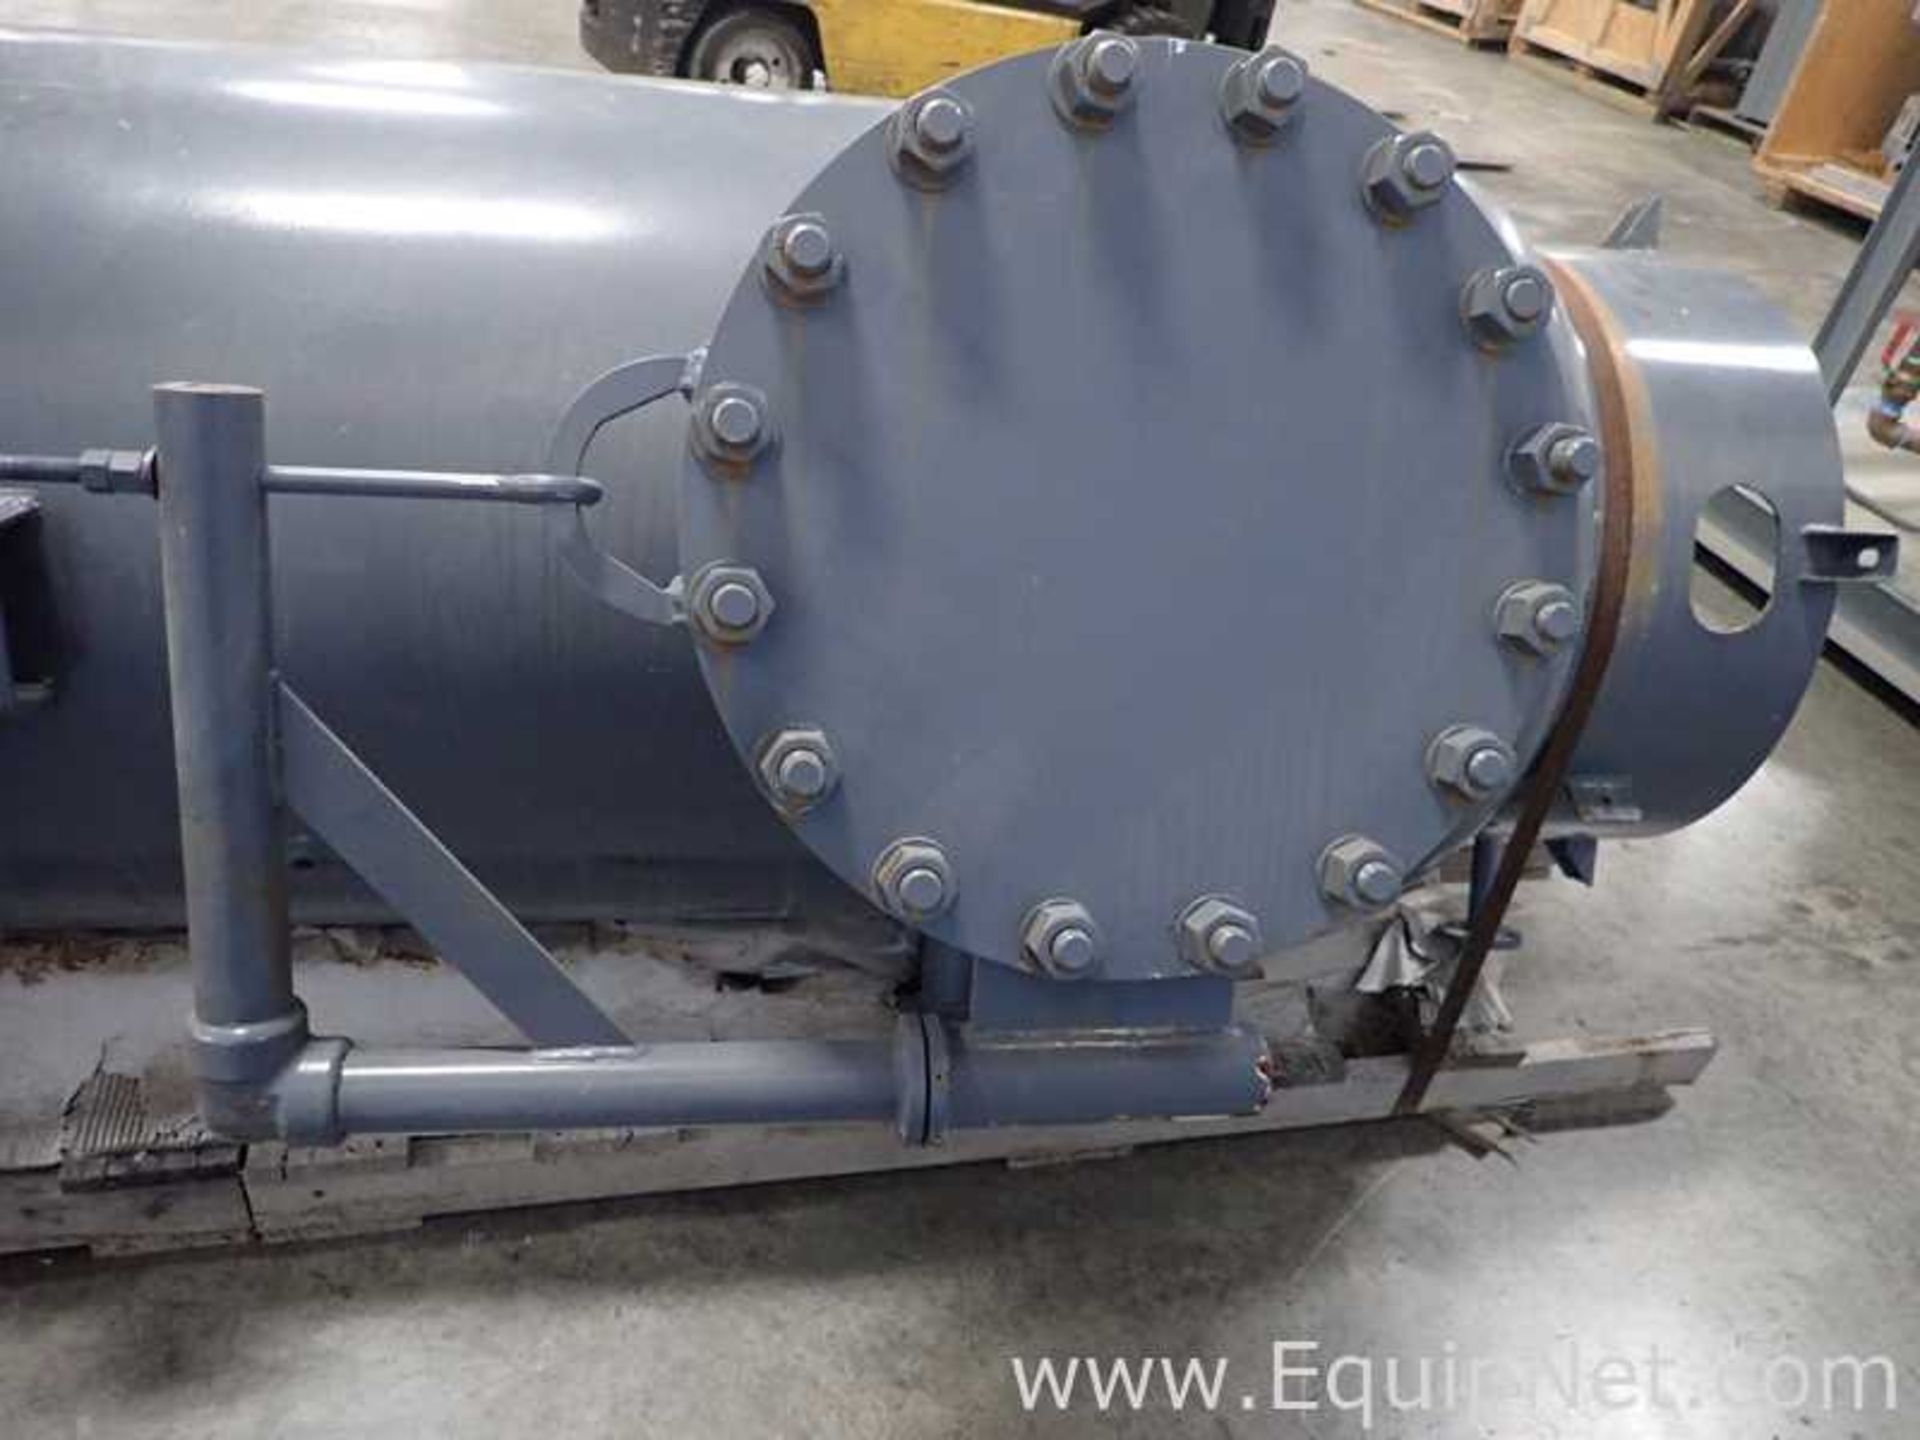 EQUIPNET LISTING #765750; REMOVAL COST: $40; DESCRIPTION: Steel Fab Carbon Steel Receiving Tank - Image 5 of 8